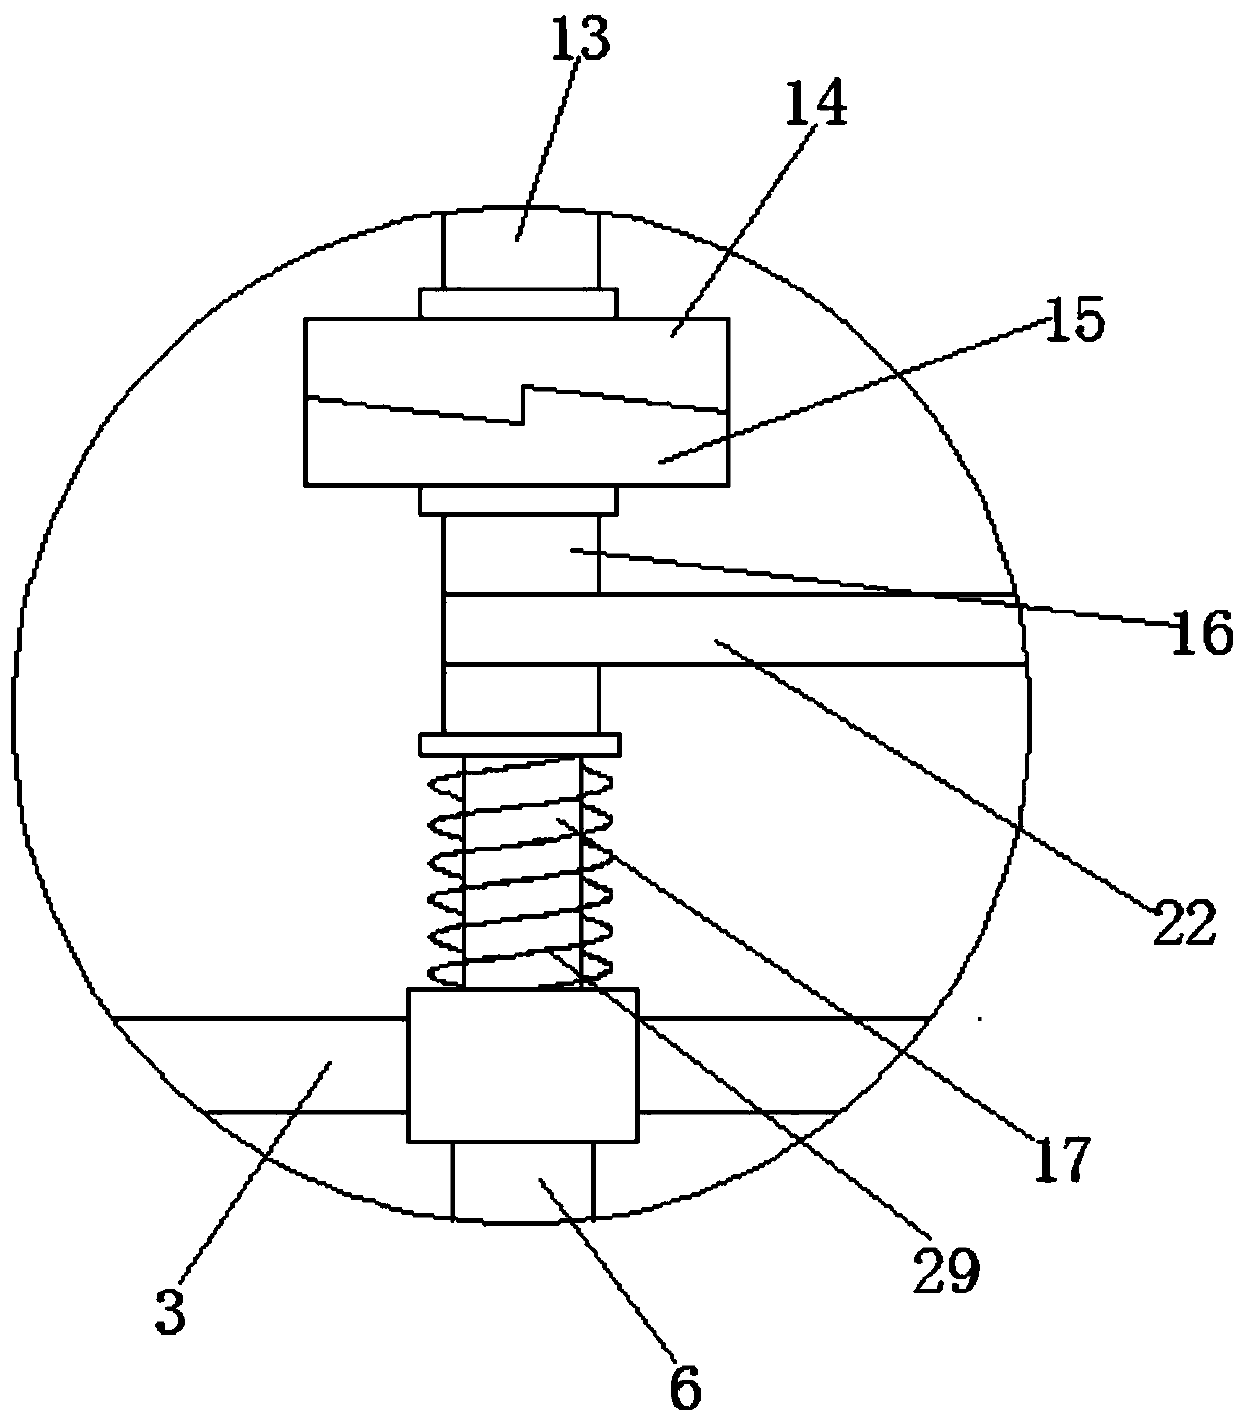 Cleaning and sterilizing device for medical apparatus and instruments